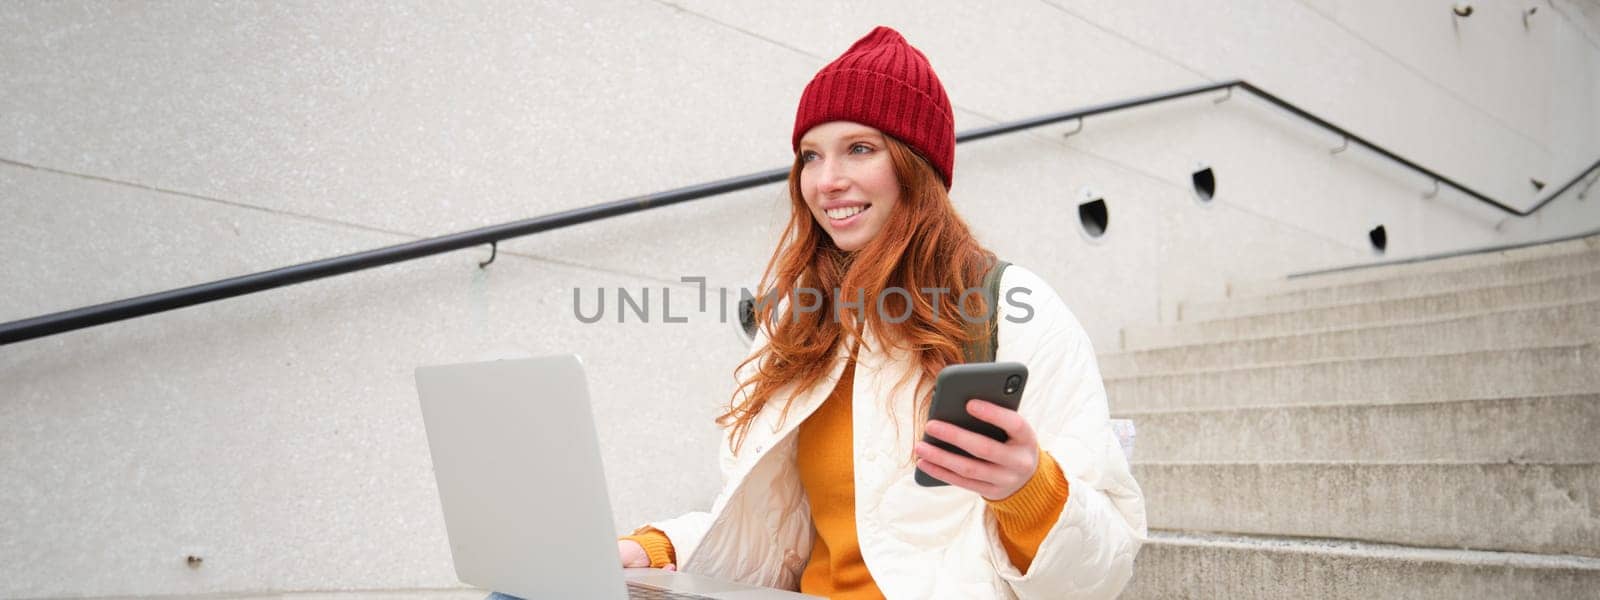 Smiling redhead woman with mobile phone and laptop, sitting on stairs outside building, connects to public wifi, using smartphone and computer.